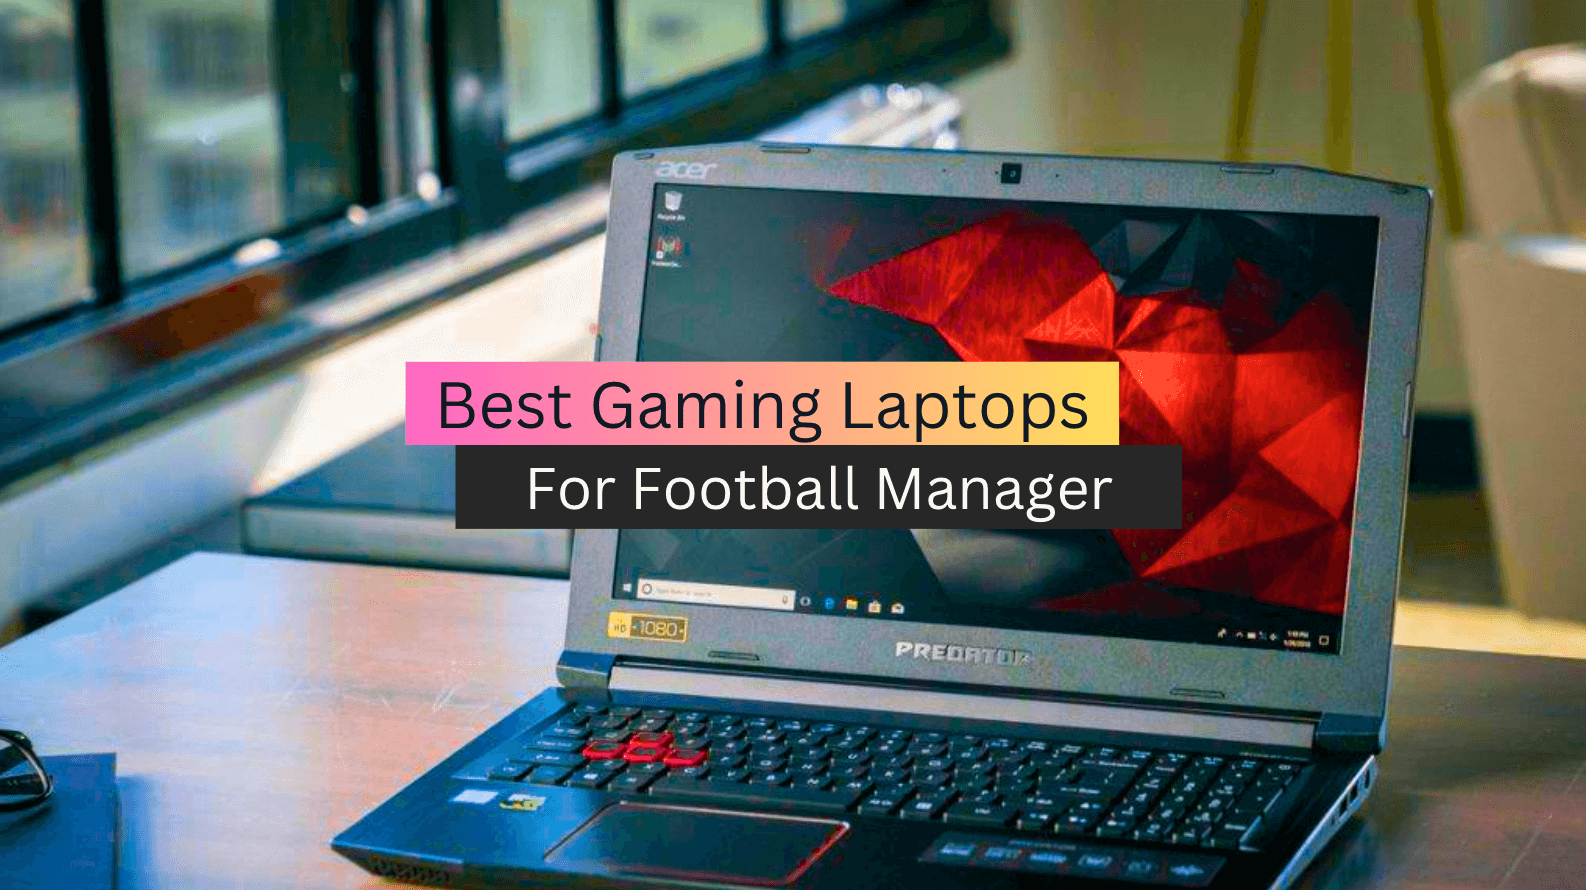 Top 7 Best Gaming Laptops for Football Manager (2023 Guide)